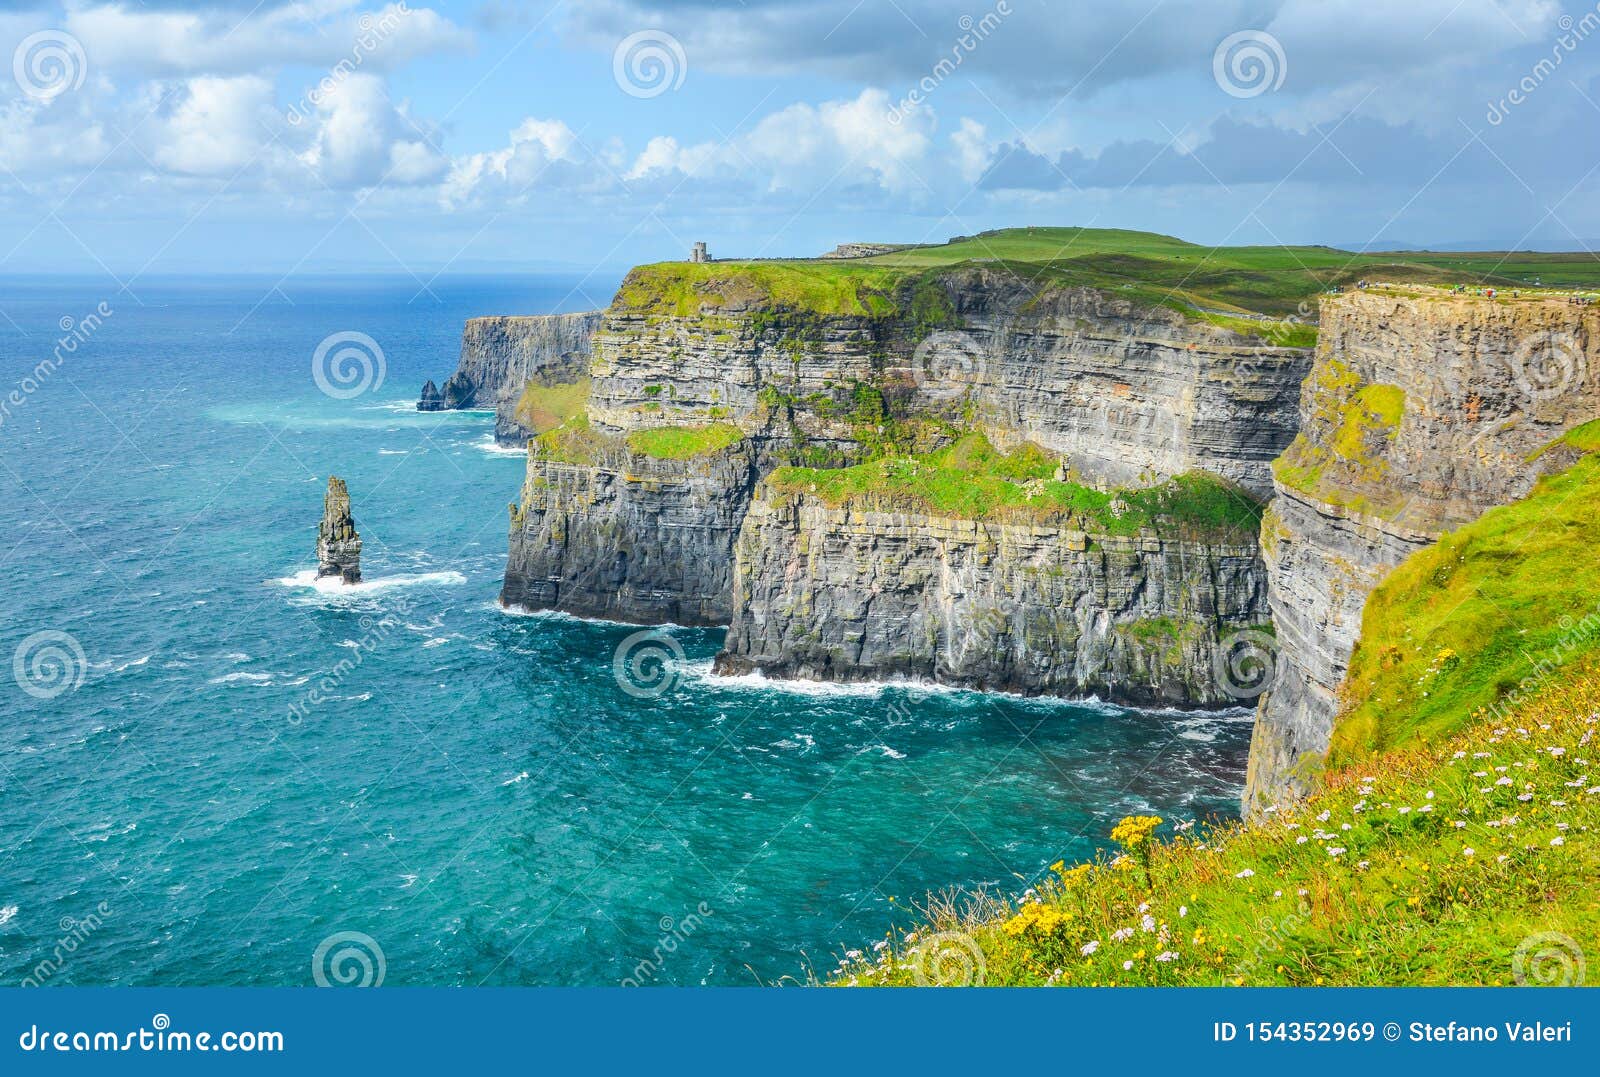 scenic view of cliffs of moher, one of the most popular tourist attractions in ireland, county clare.